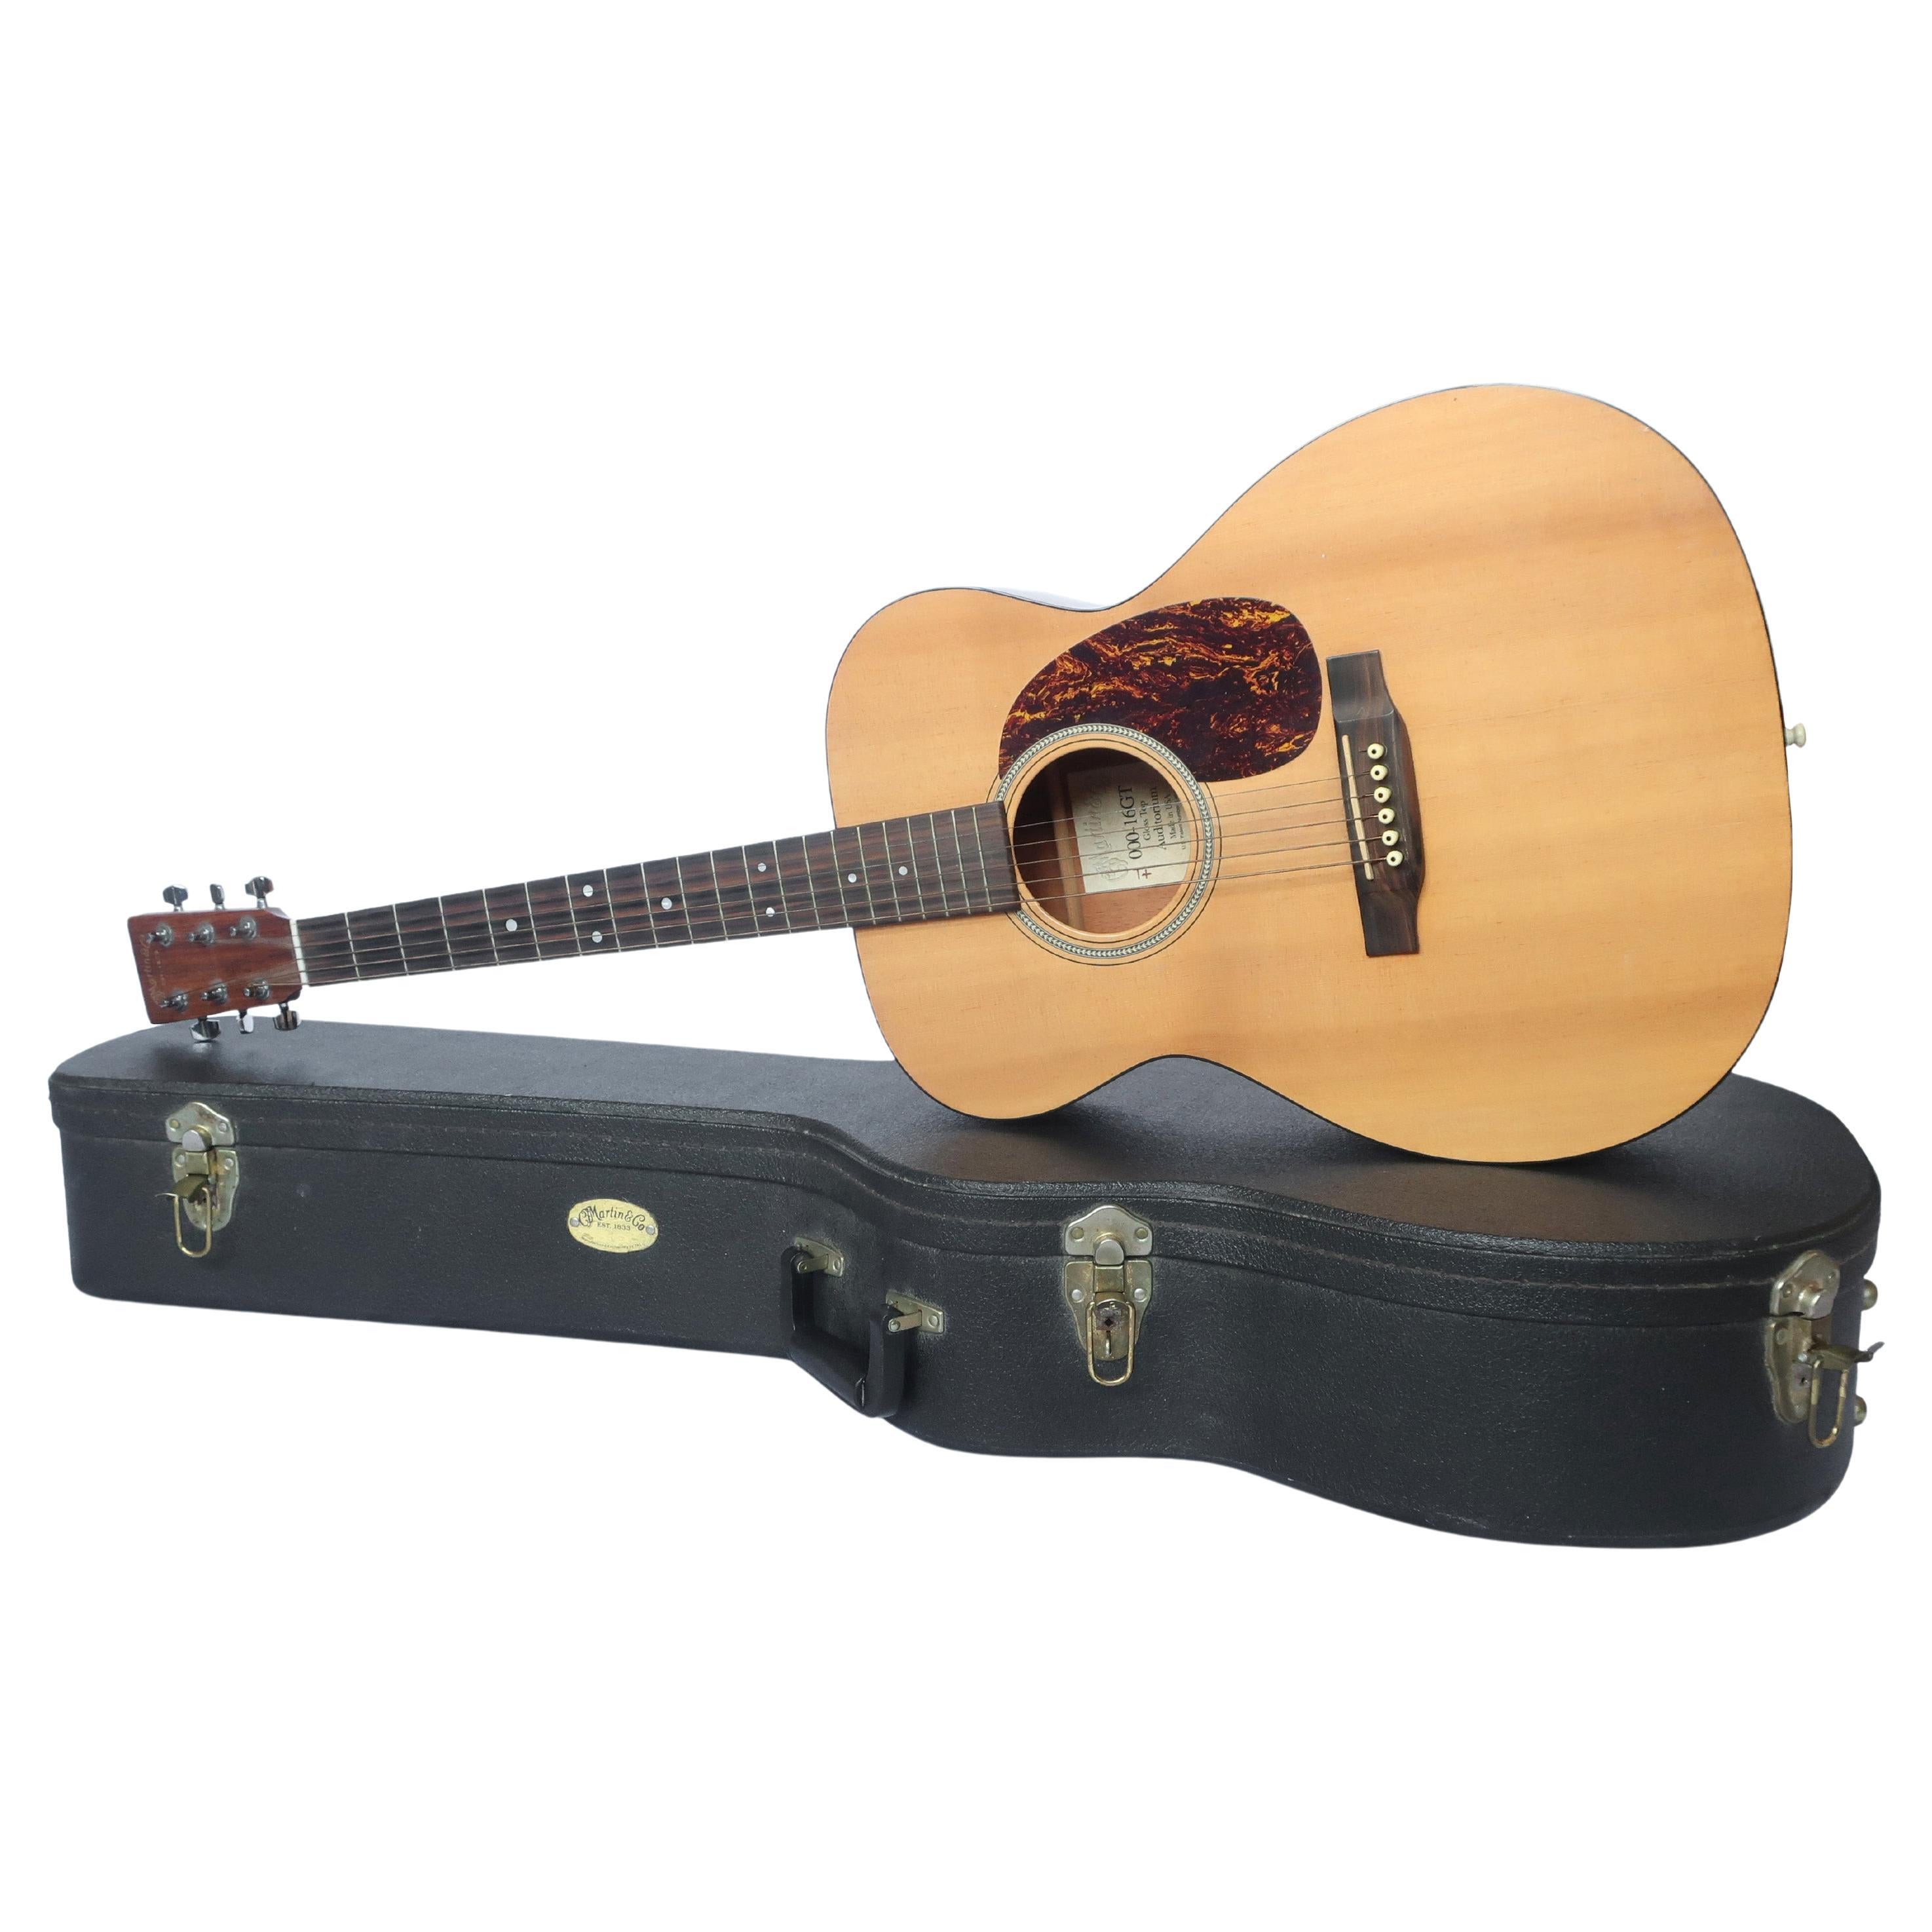 Martin 00016-GT Acoustic Guitar with Case